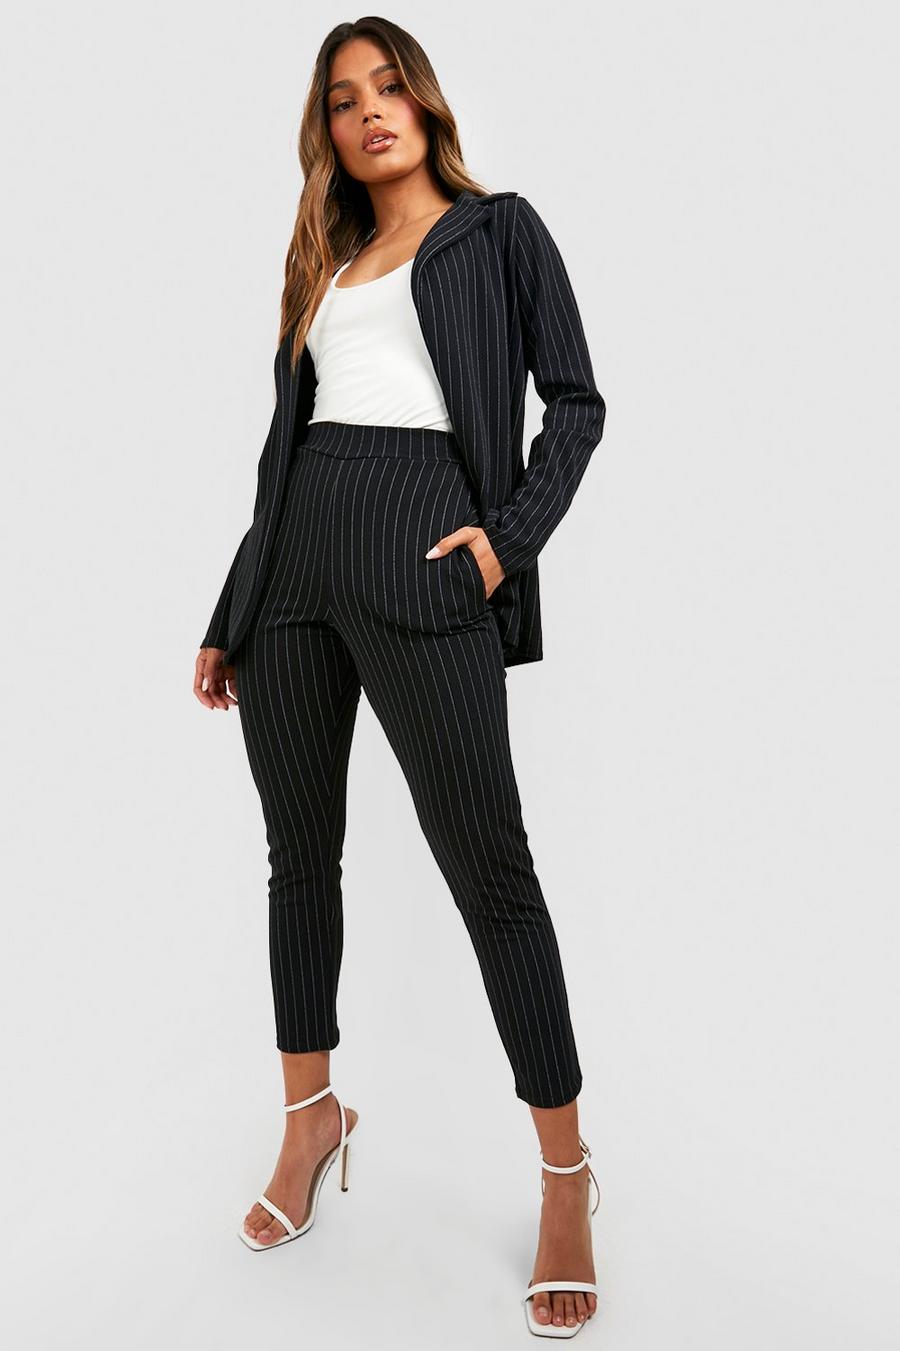 Black Pinstripe Tailored Blazer And Trouser Co-Ord Suit